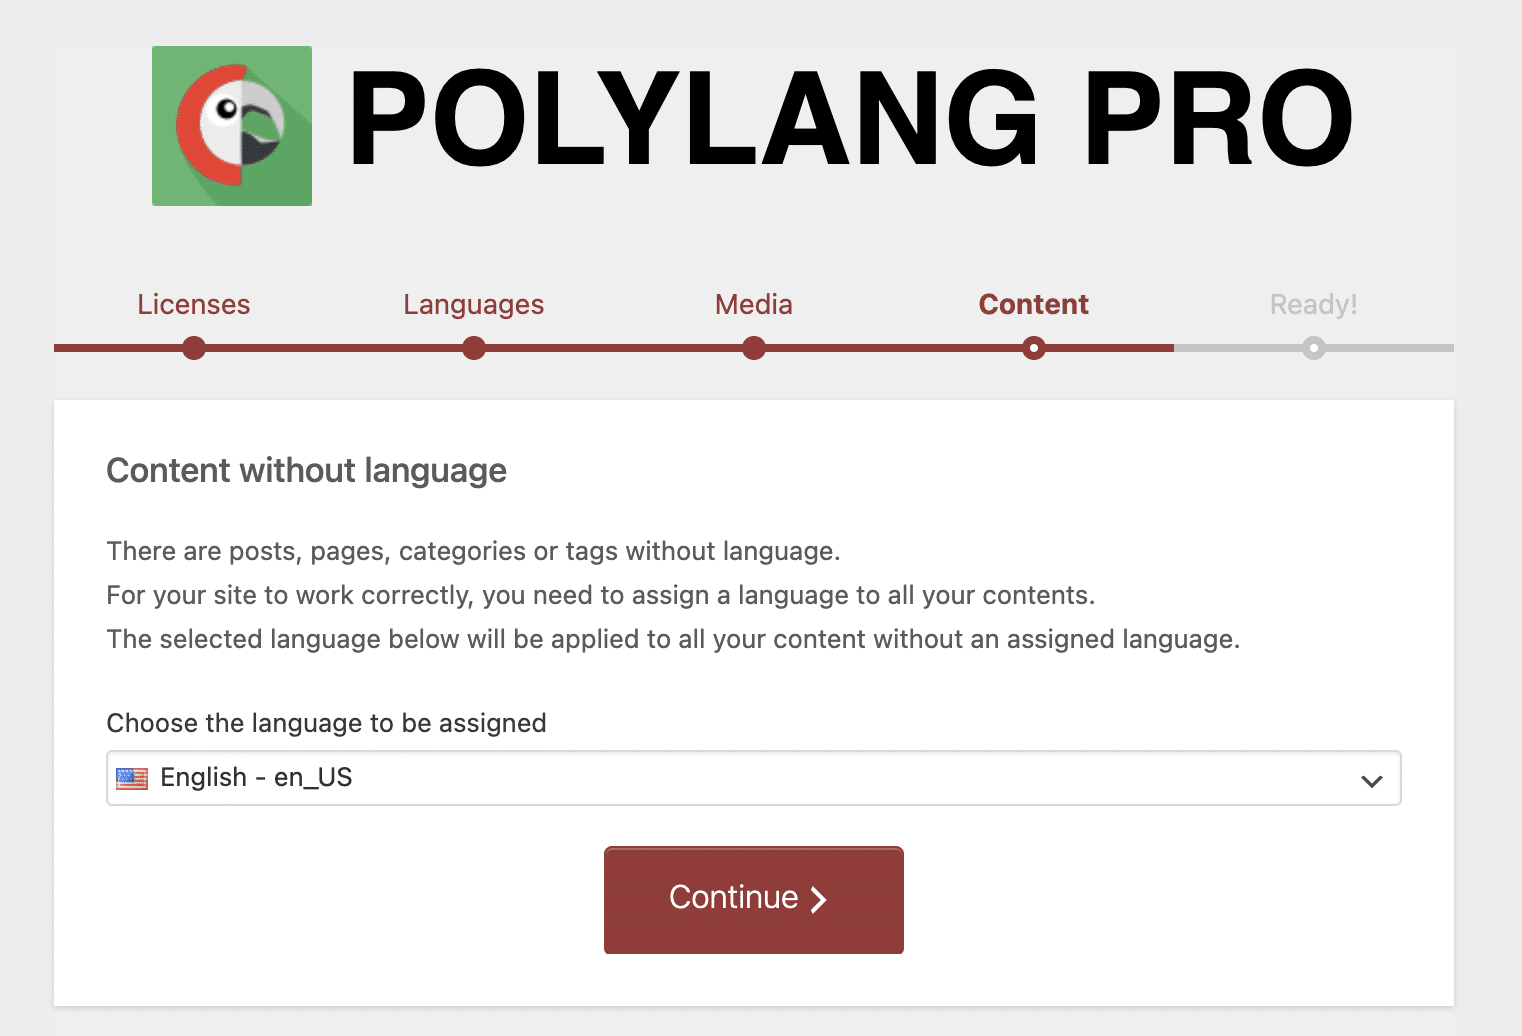 Choose the language to be assigned on Polylang Pro.